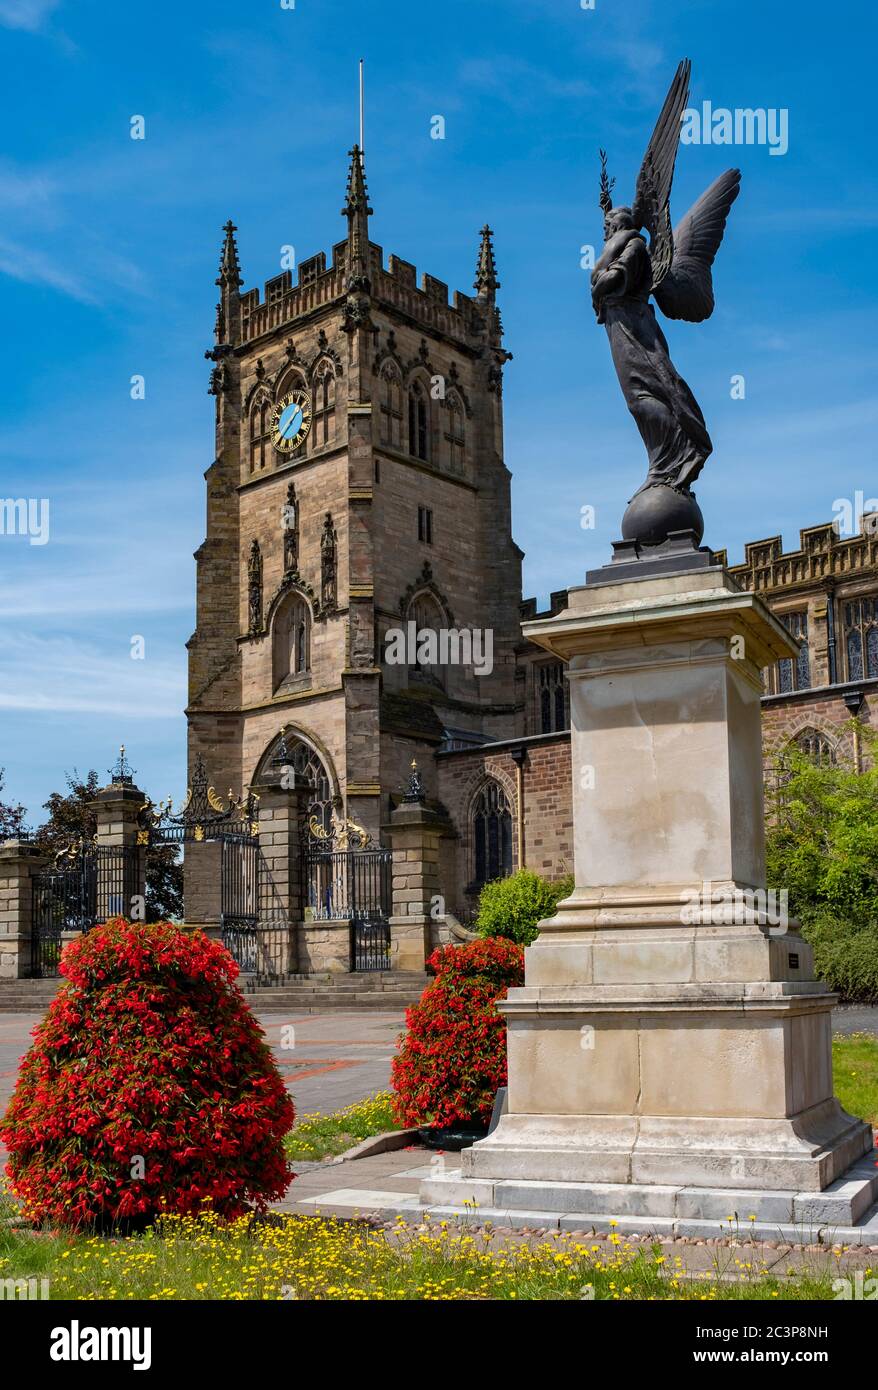 St Marys Church in Kidderminster, Worcestershire, England, Europe. Stock Photo